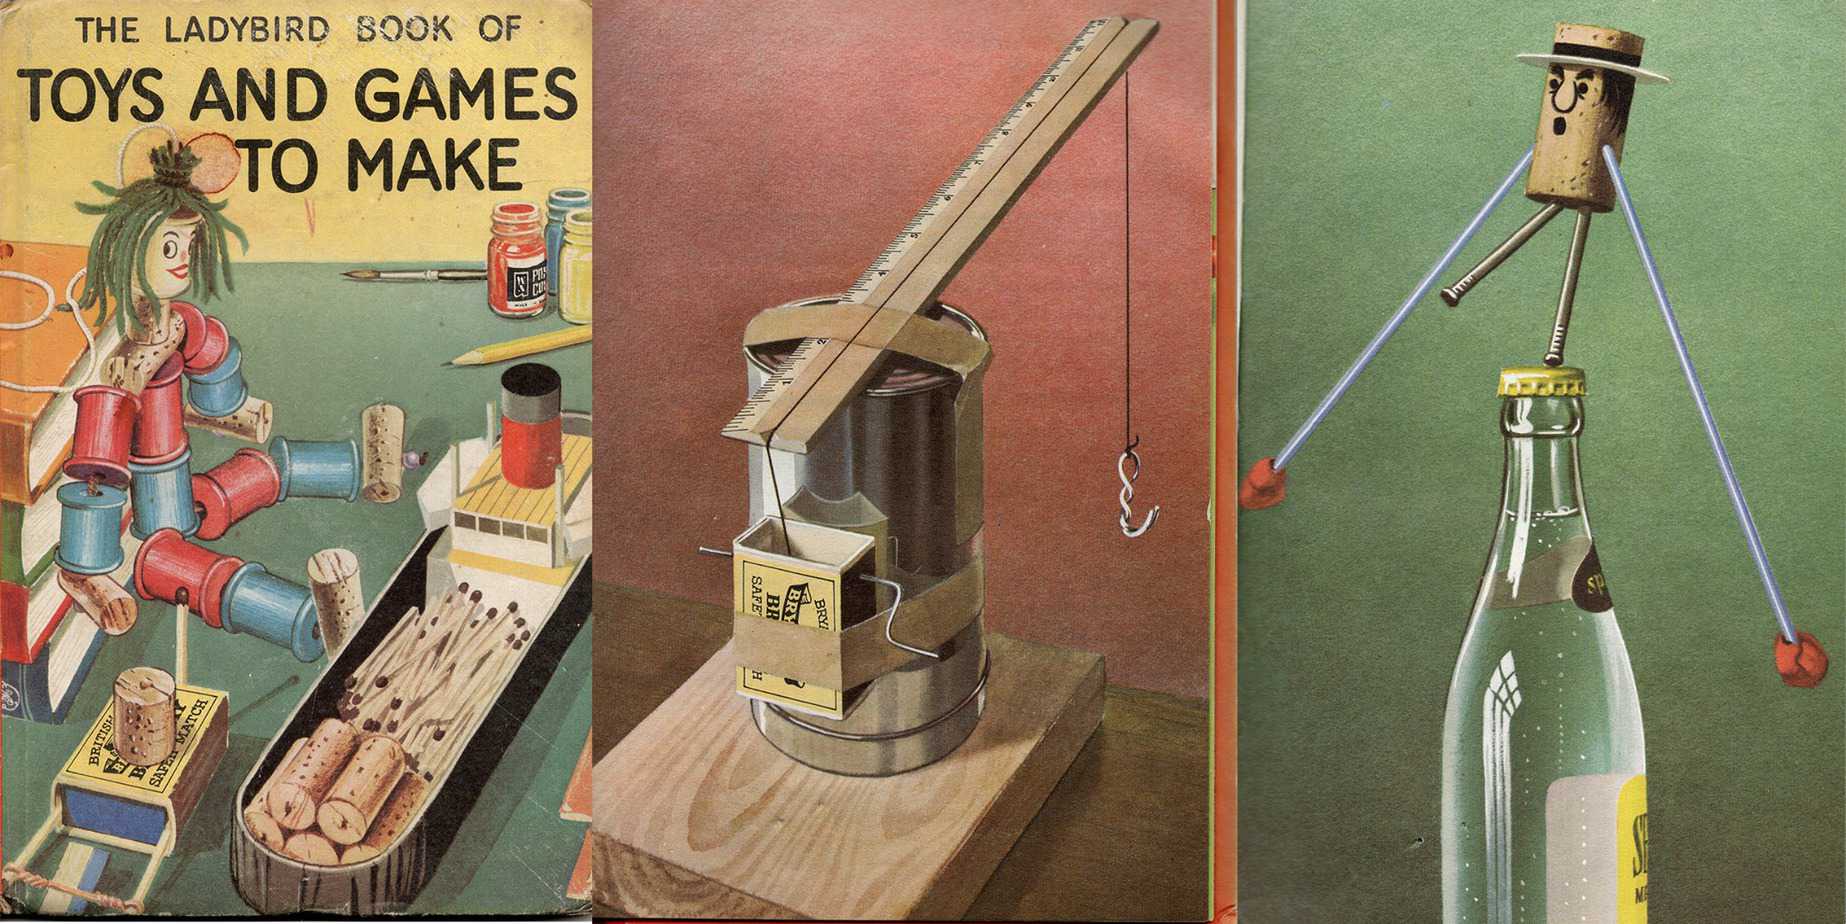 Ayton, Robert, The Ladybird Book of TOYS AND GAMES TO MAKE by James Webster, 1966